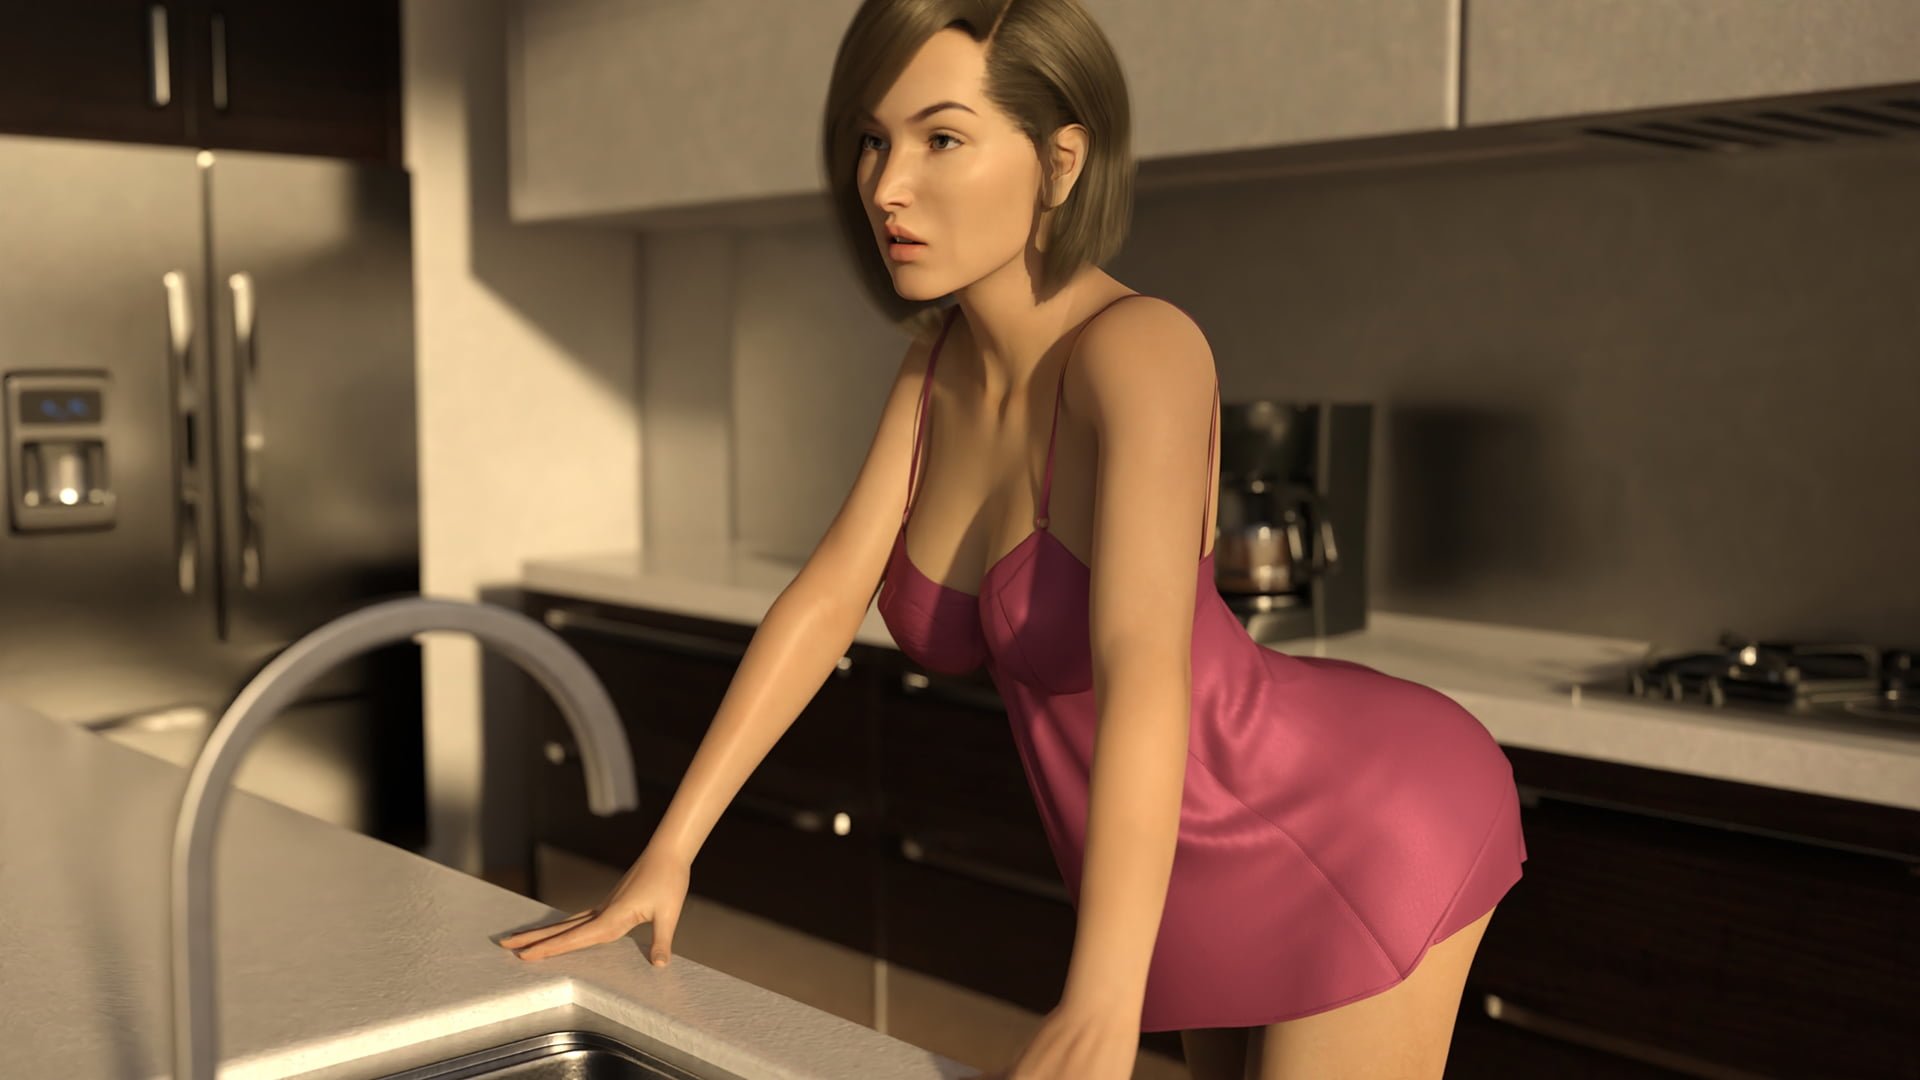 Ambition - Version 0.1 & Incest Patch - Free family porn PC game.